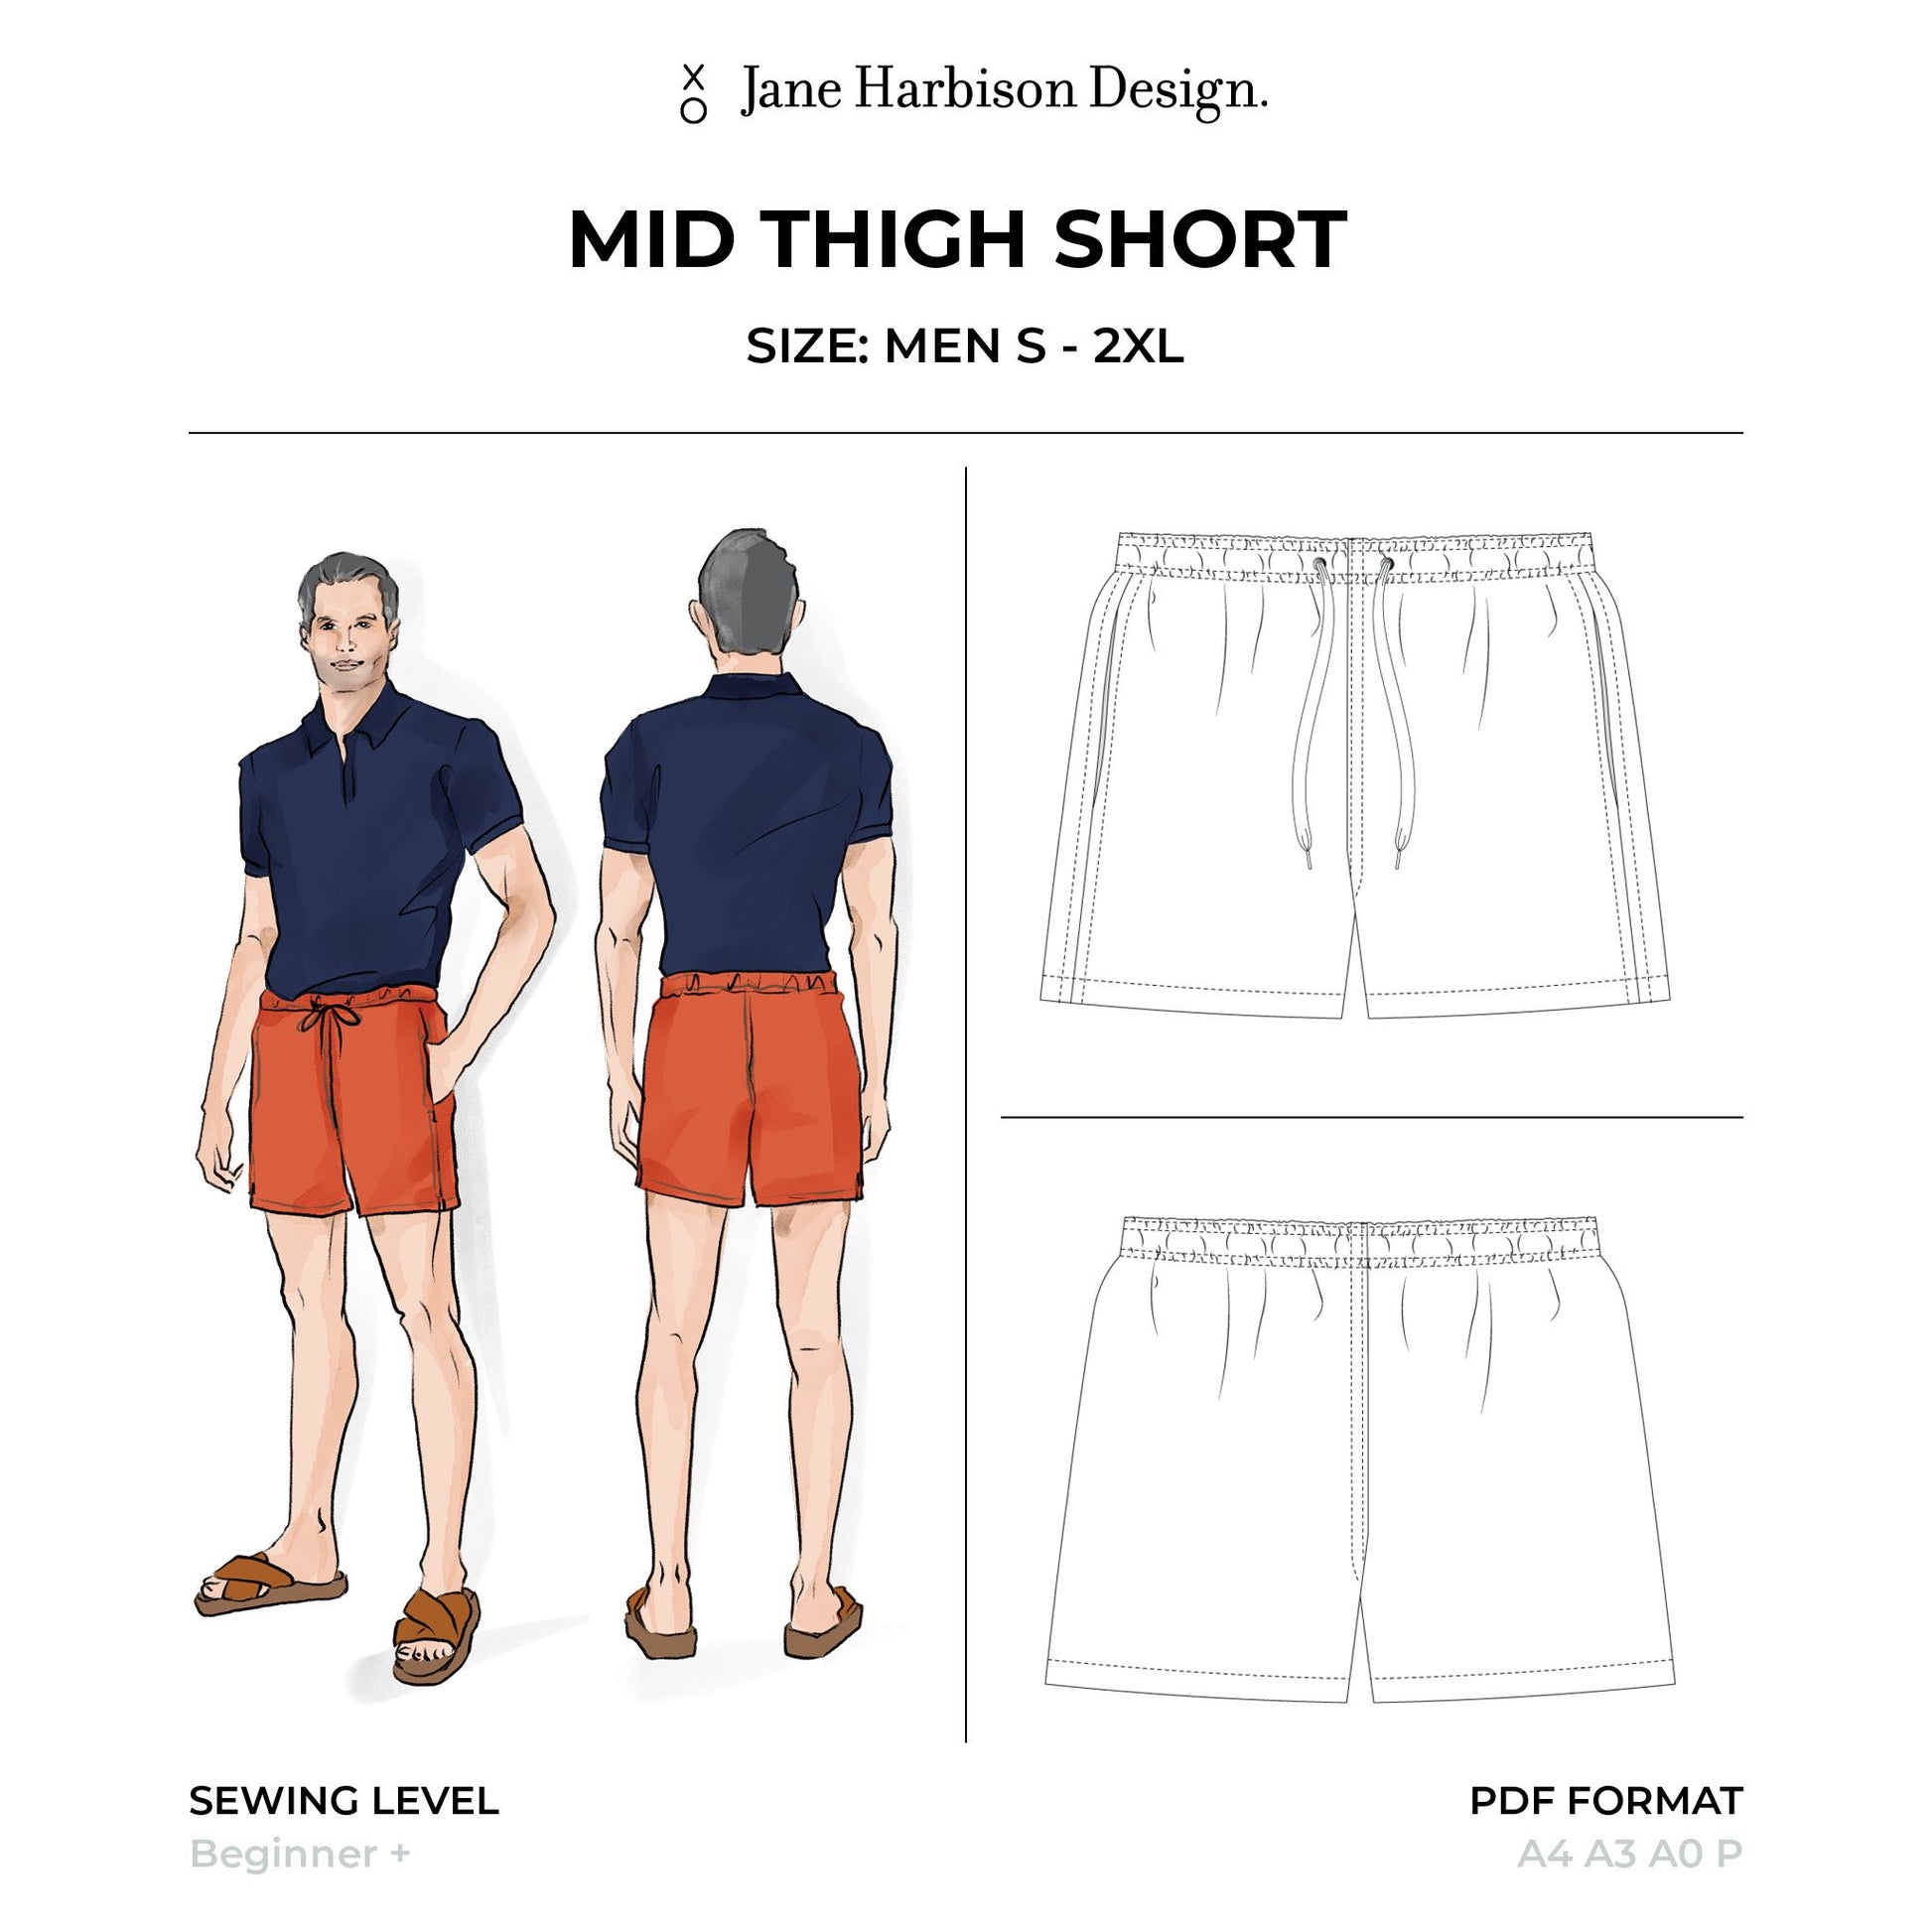 Men's Mid-Thigh Short Sewing Pattern For Beginners - Size Men S to